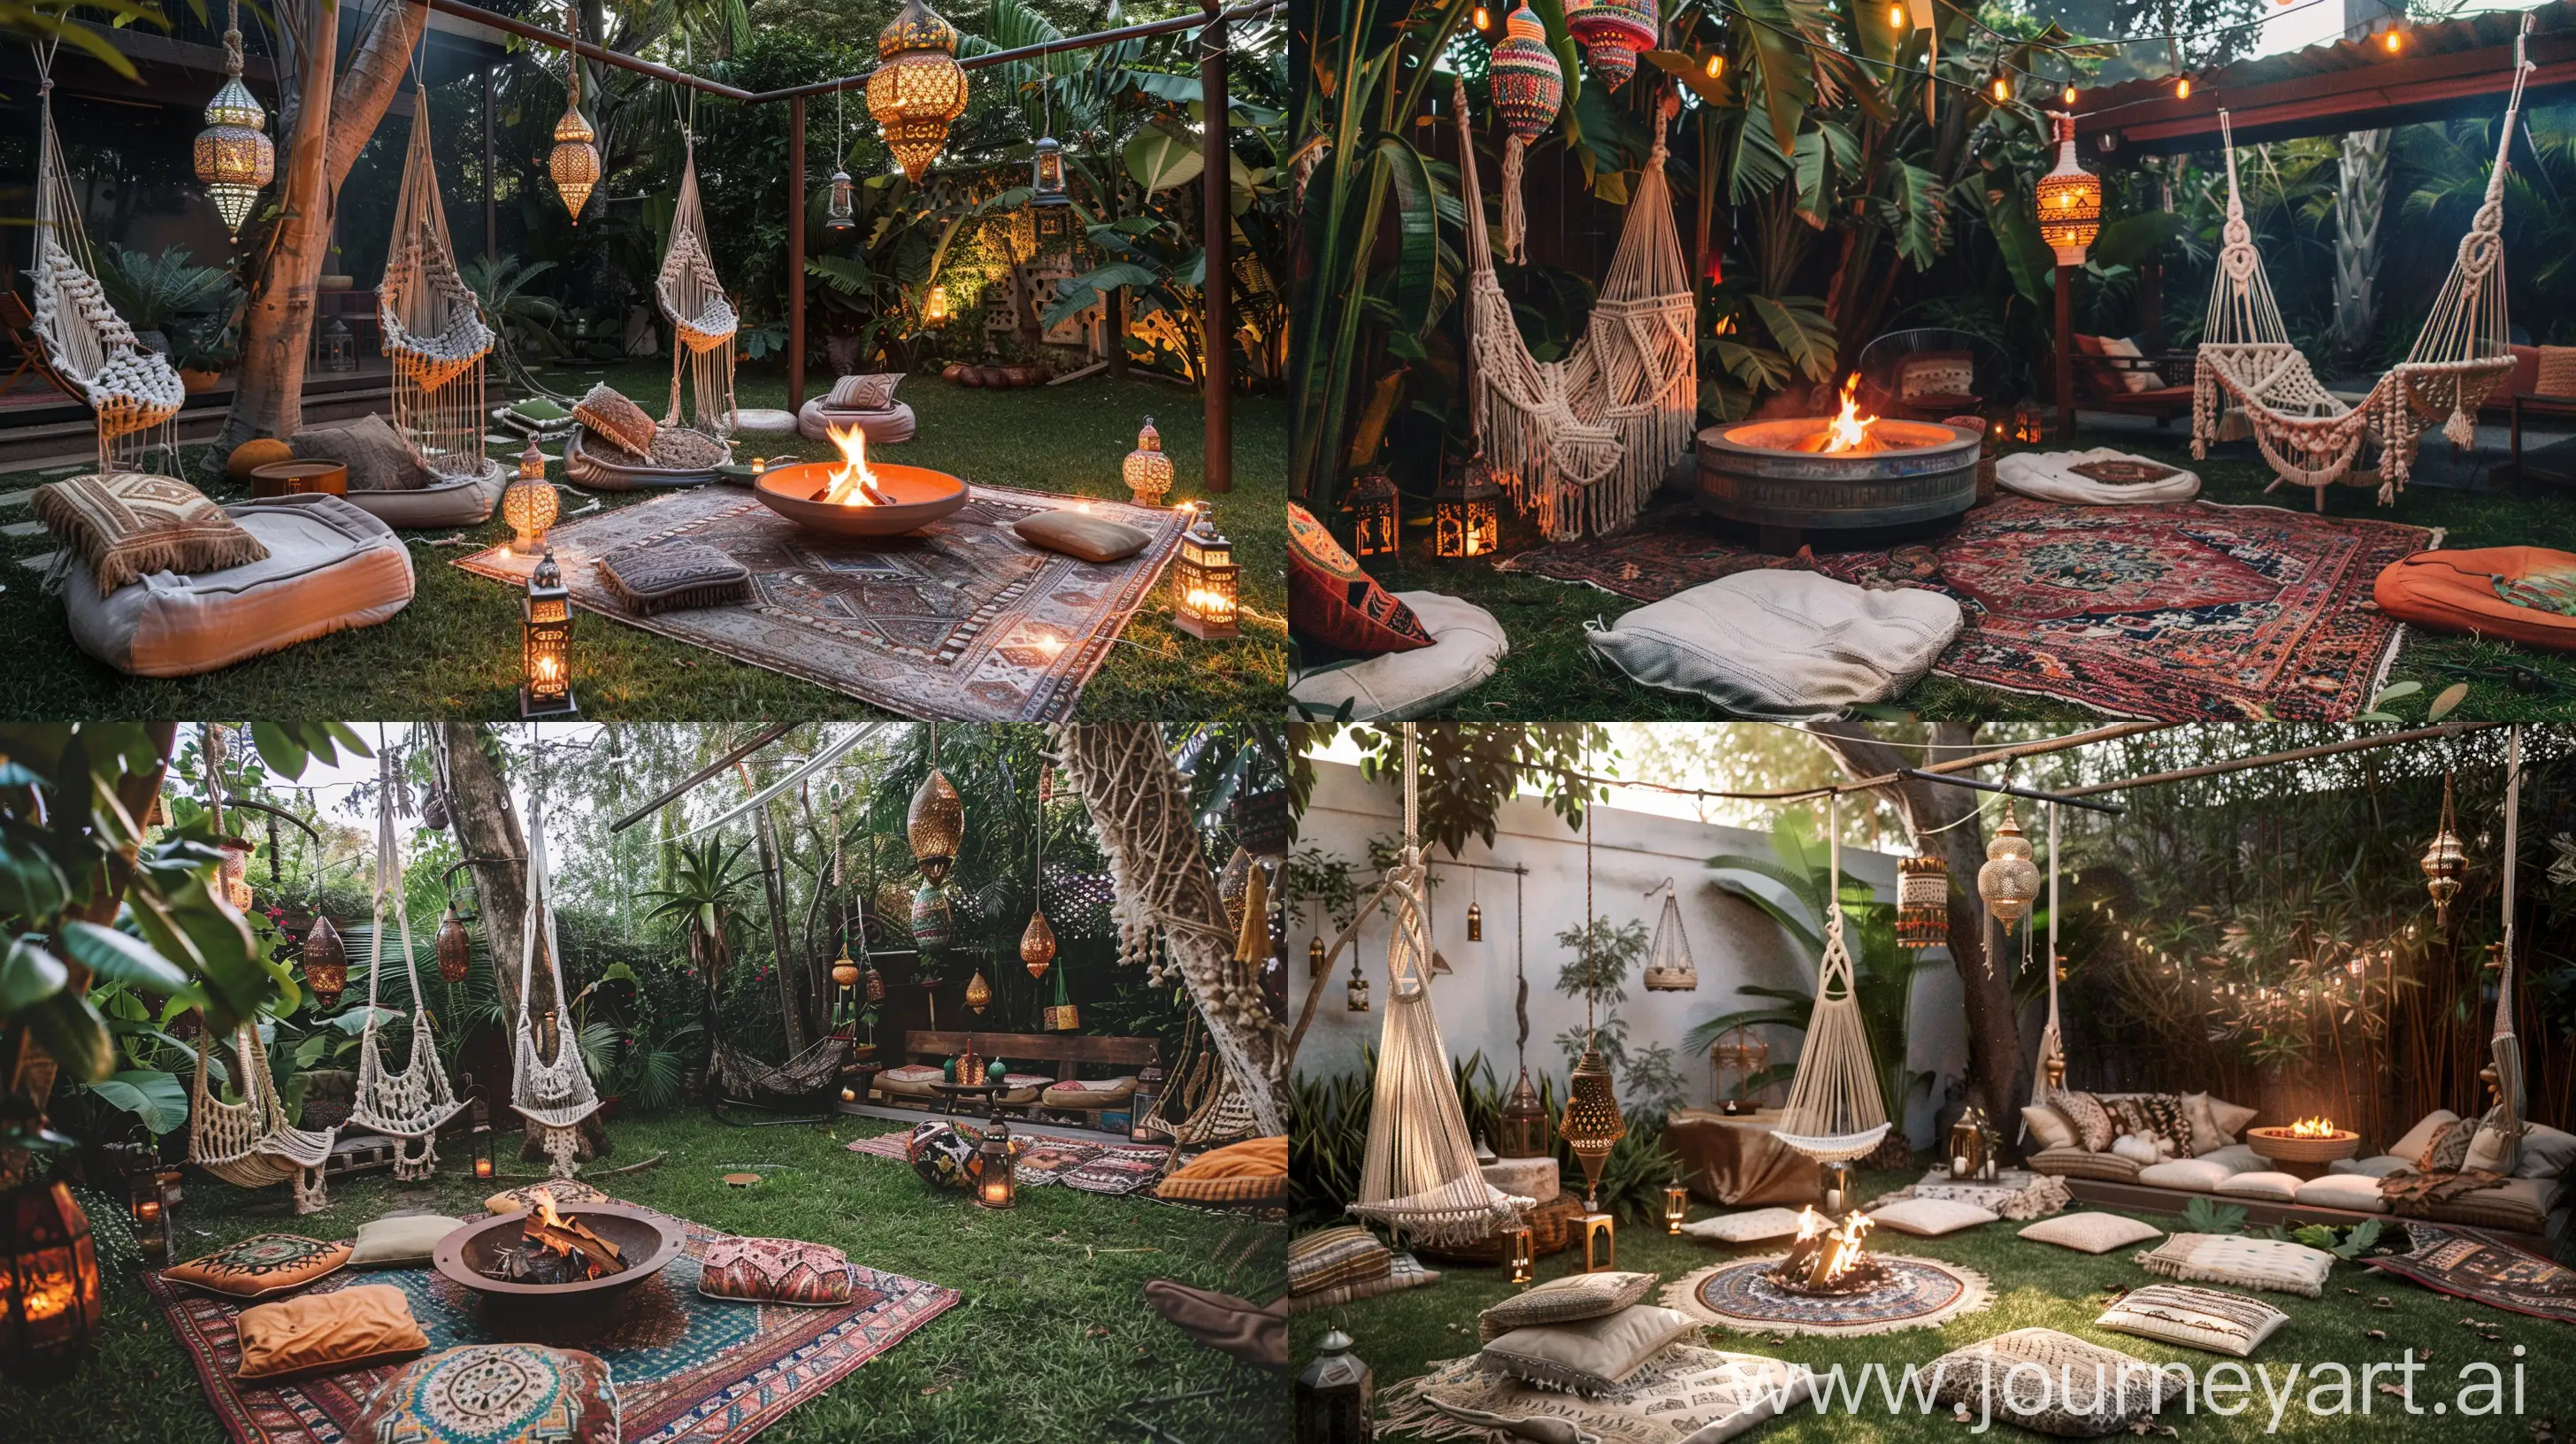 Bohemian-Outdoor-Retreat-Stylish-Backyard-with-Hanging-Macrame-Chairs-Moroccan-Lanterns-and-a-Cozy-Fire-Pit